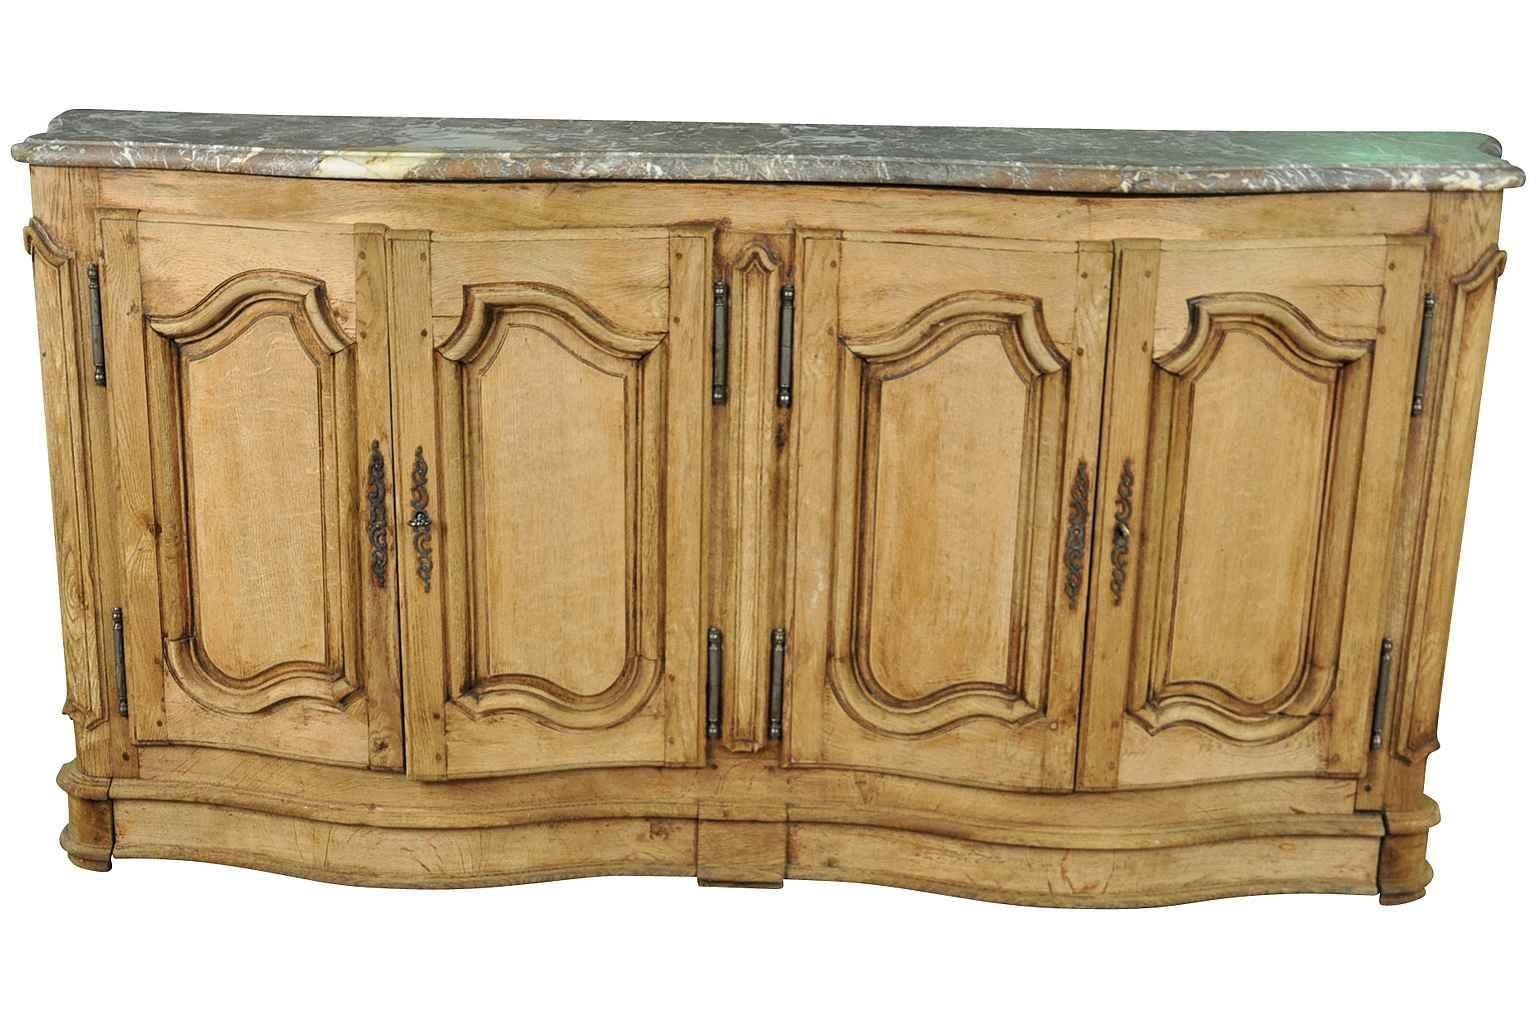 A stunning 19th century French hunt buffet with its original marble top. Beautifully constructed from washed or bleached oak curvilinear fascia with two sets of double doors.